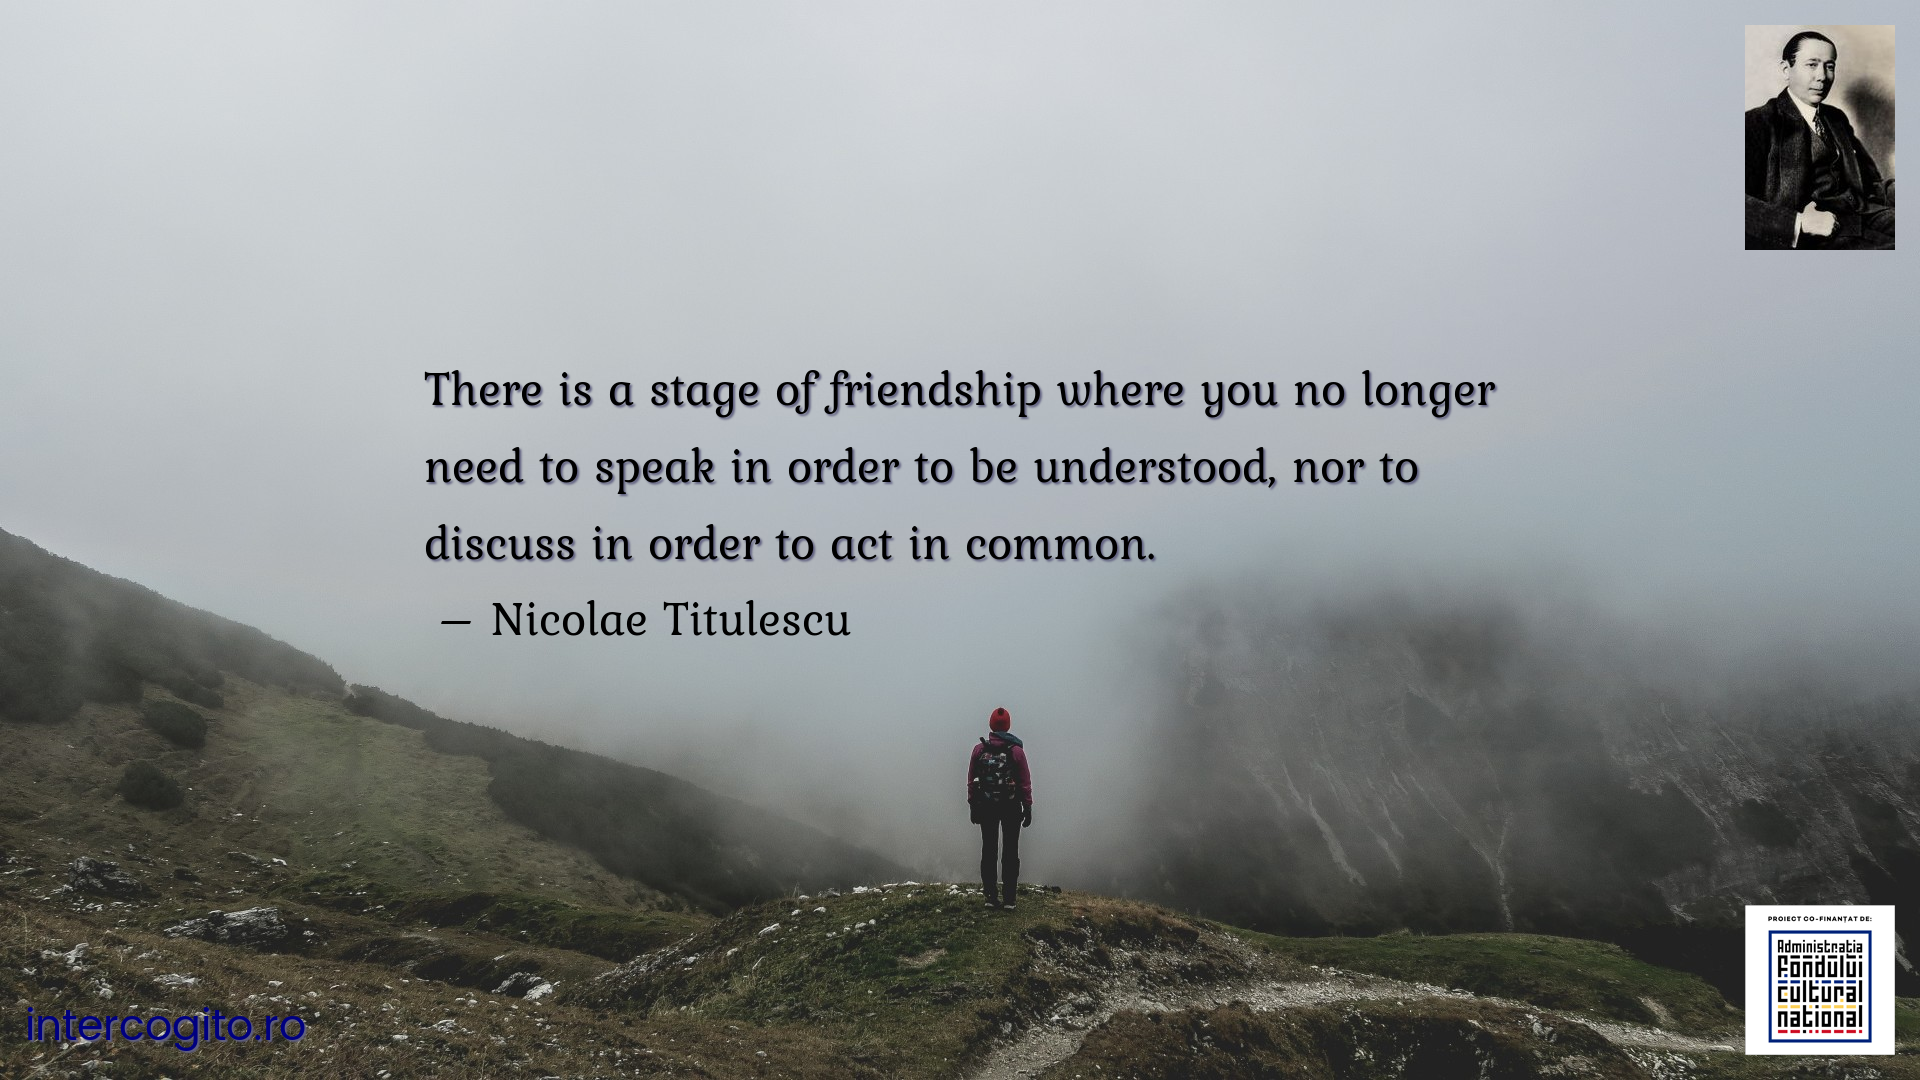 There is a stage of friendship where you no longer need to speak in order to be understood, nor to discuss in order to act in common.